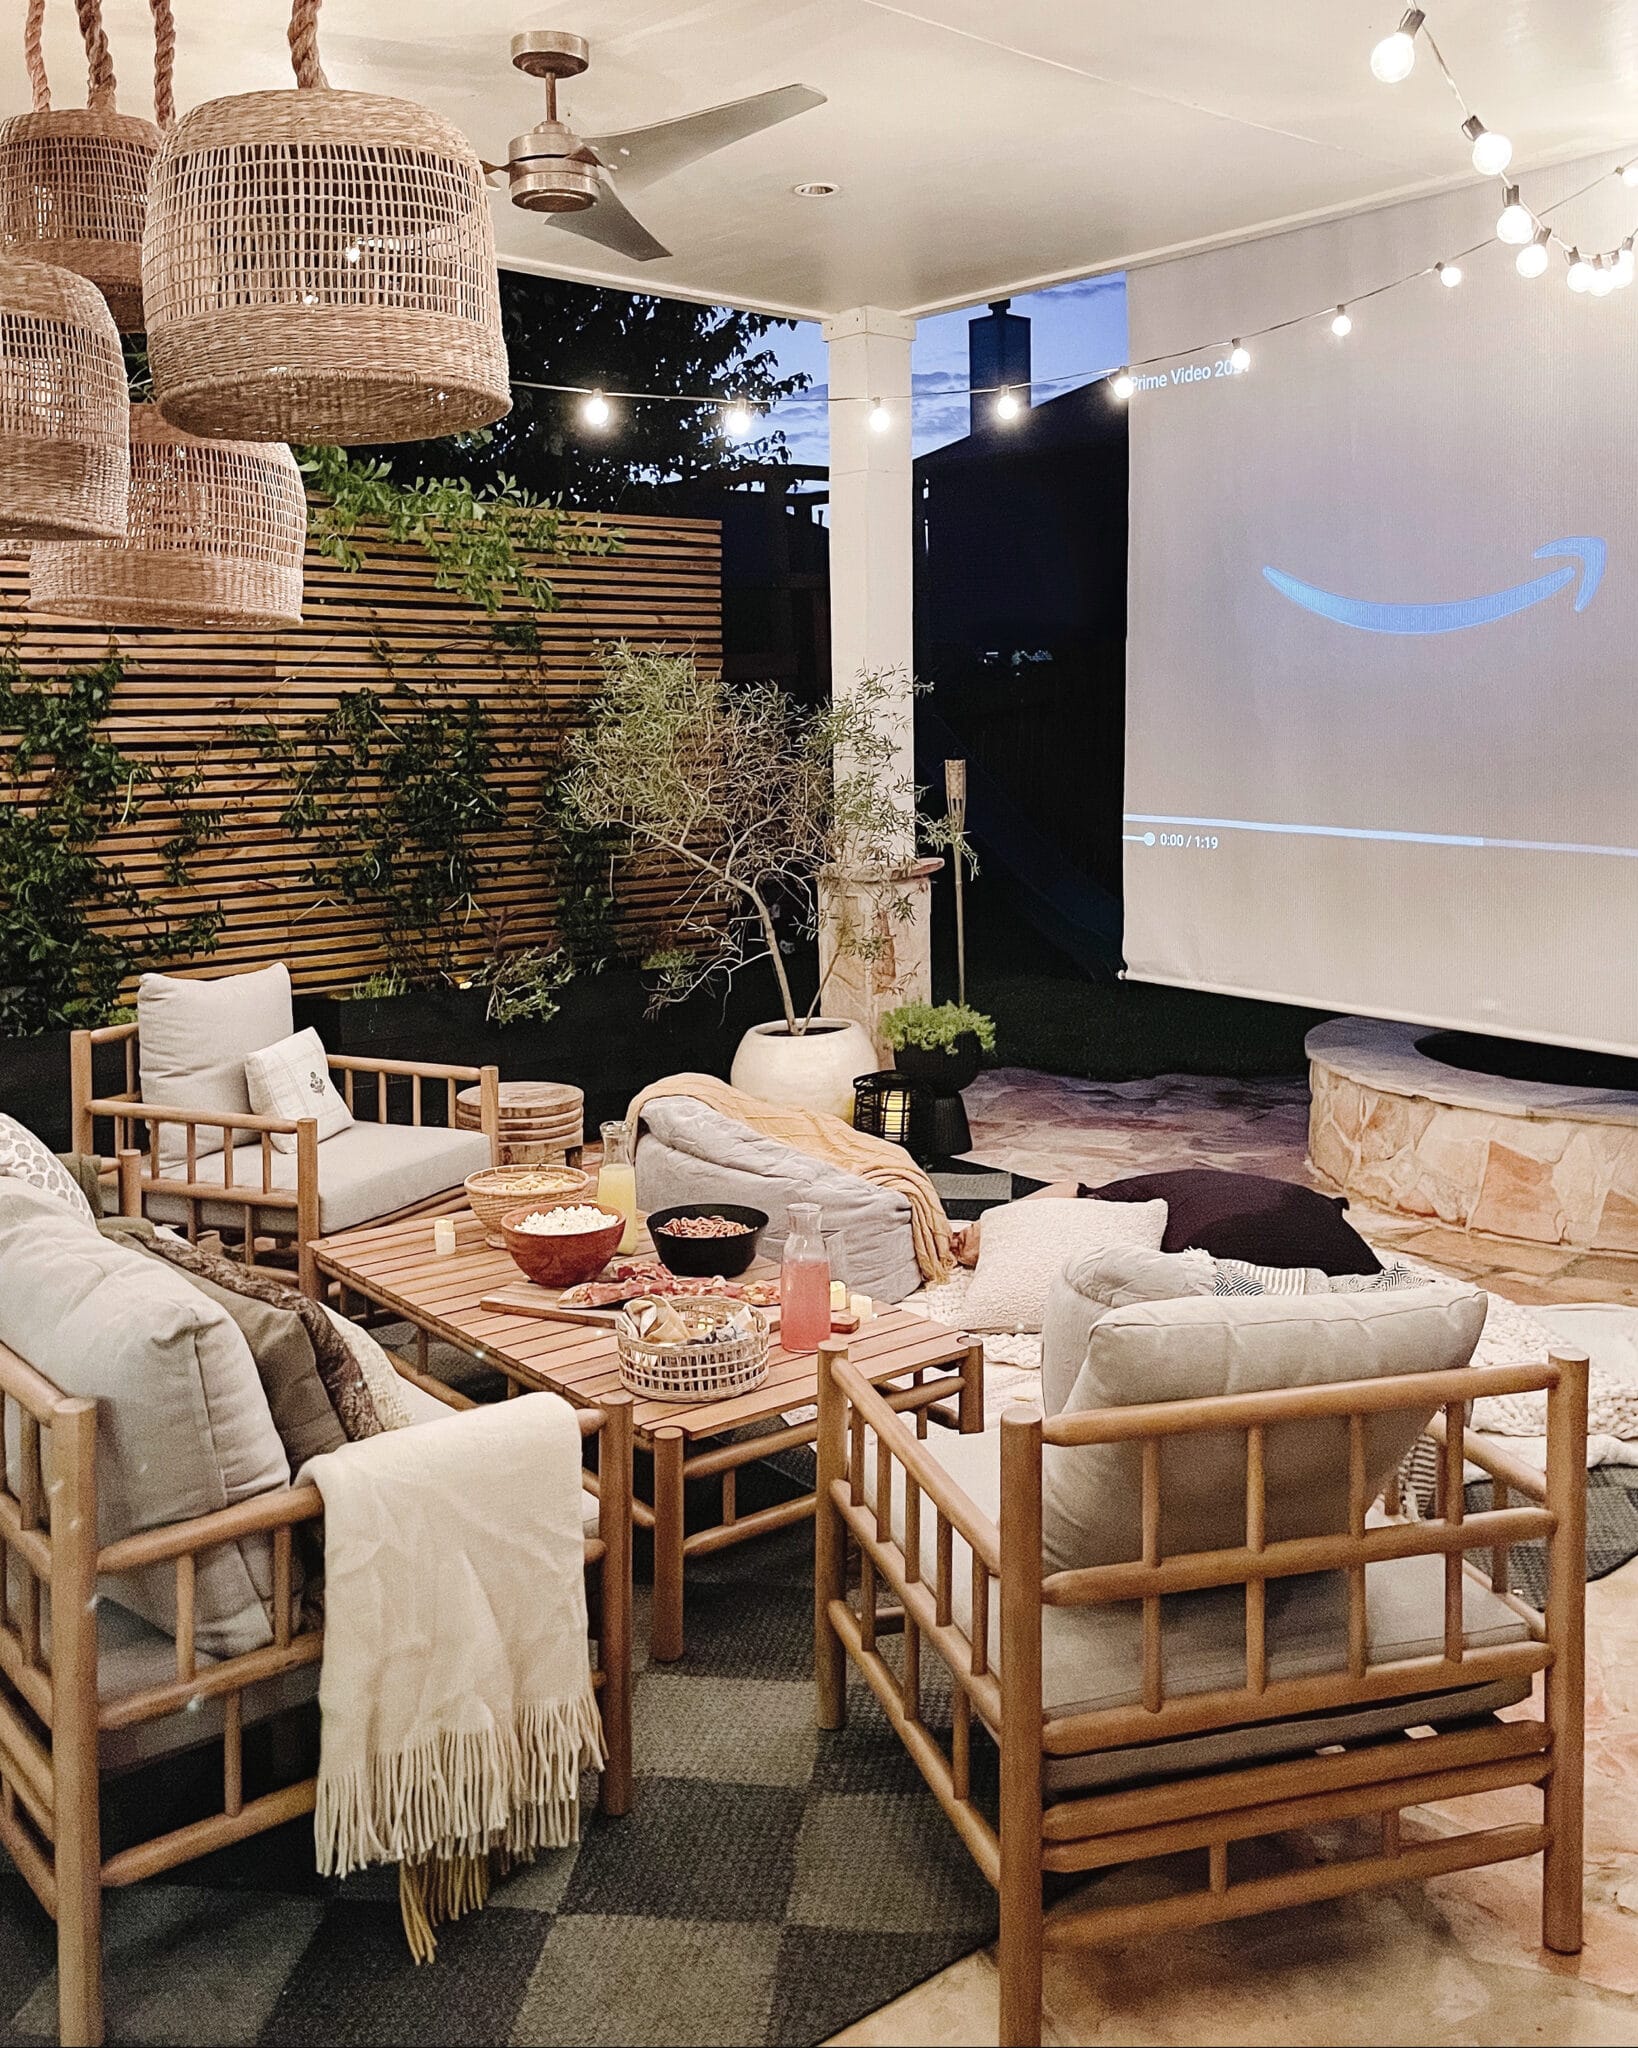 Valentine's Day traditions, including a movie outside | via Yellow Brick Home